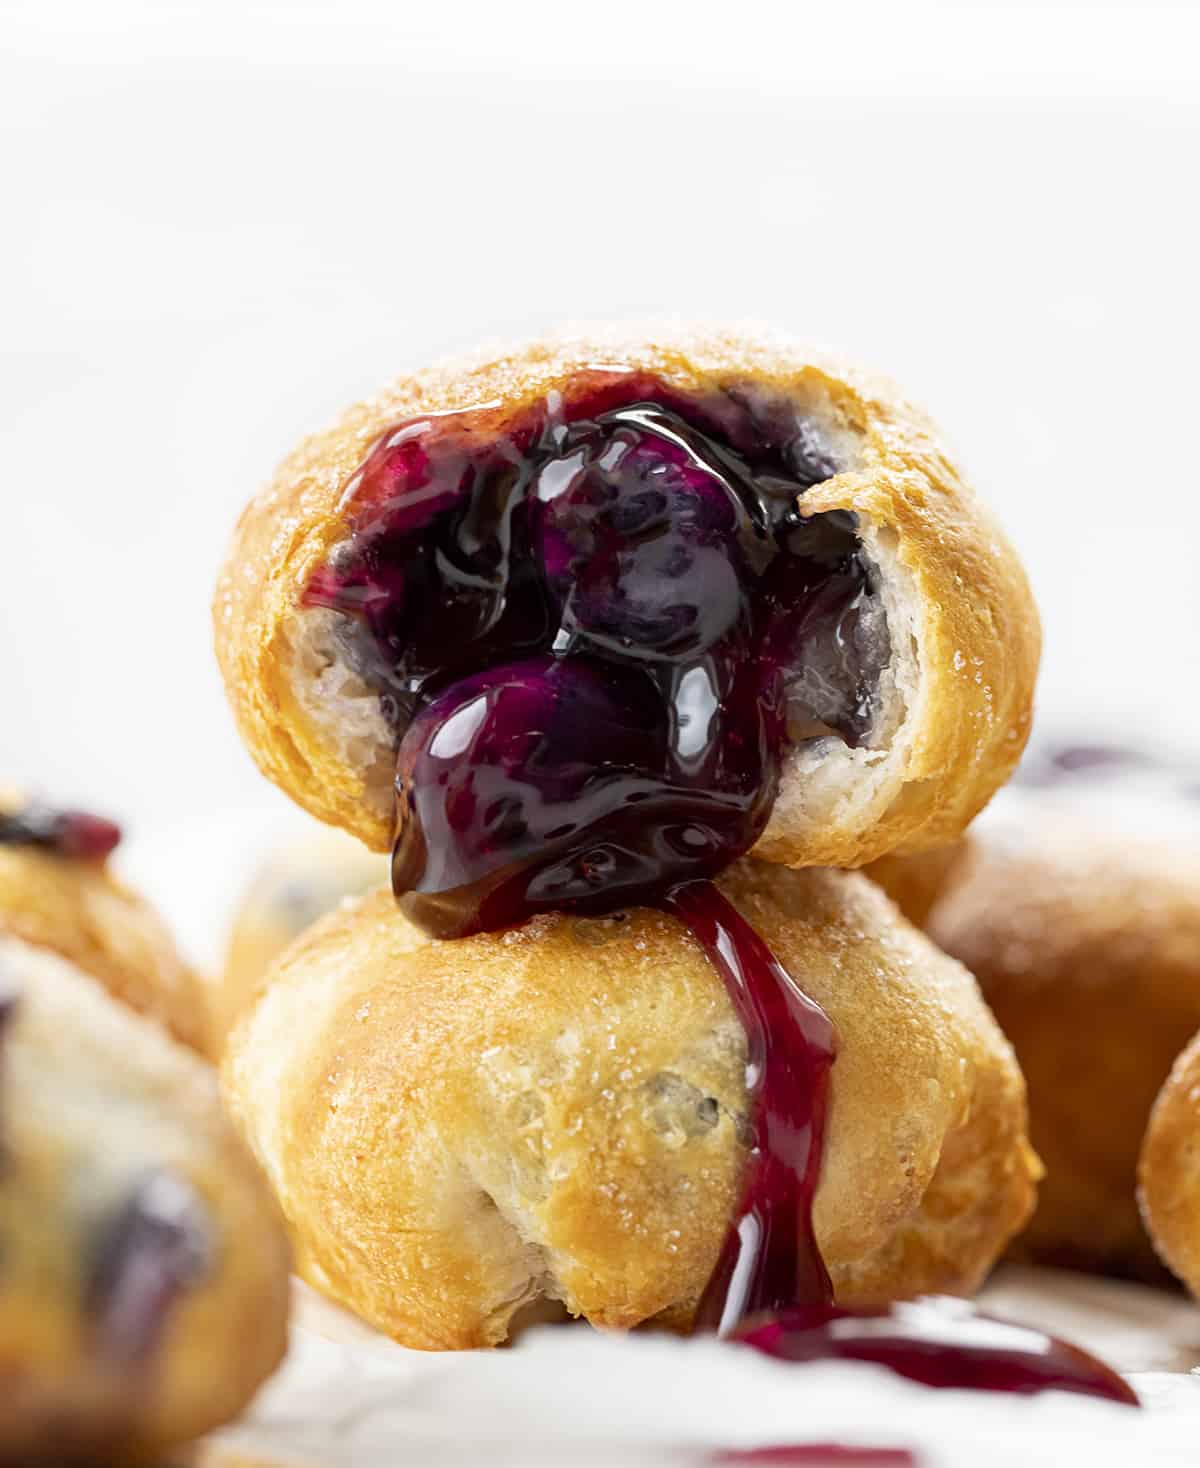 Stacked Blueberry Pie Bombs with One Cut in Half and Blueberry Pie Filling coming out. Breakfast, Blueberry Pie Bombs, Fruit Filled Hand Pies, Air Fryer Recipes, Blueberry Breakfast, Baked Blueberry Desserts, Dessert, Cherry Pie Bombs, Baked Pie Bombs, recipes, i am baker, iambaker